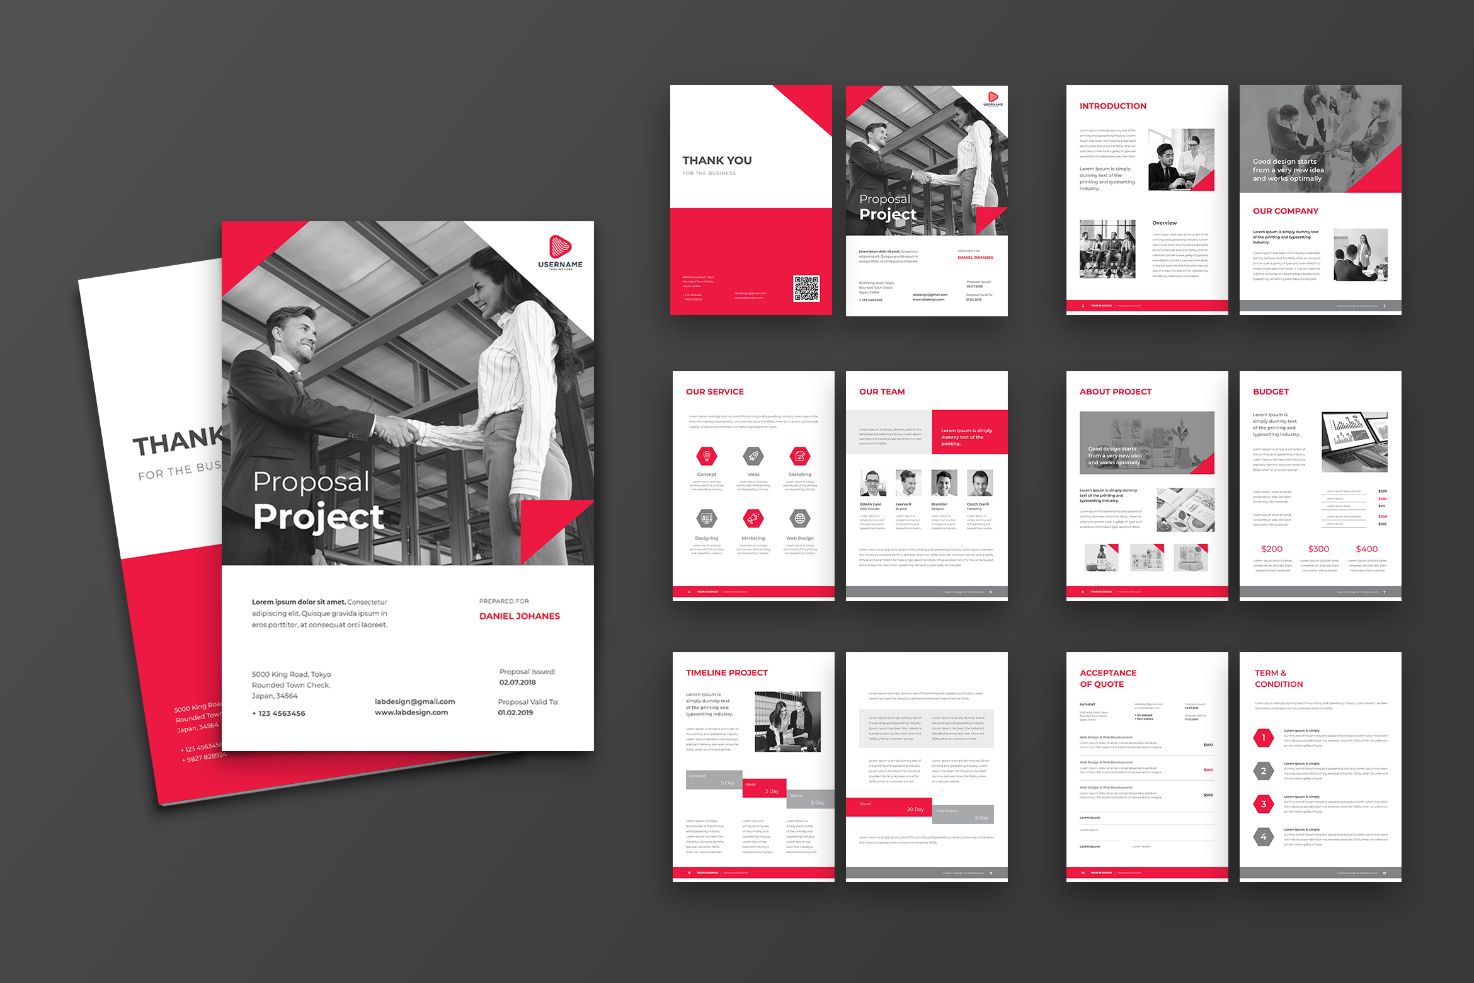 Proposal FInancial Budgeting - Corporate Identity Template